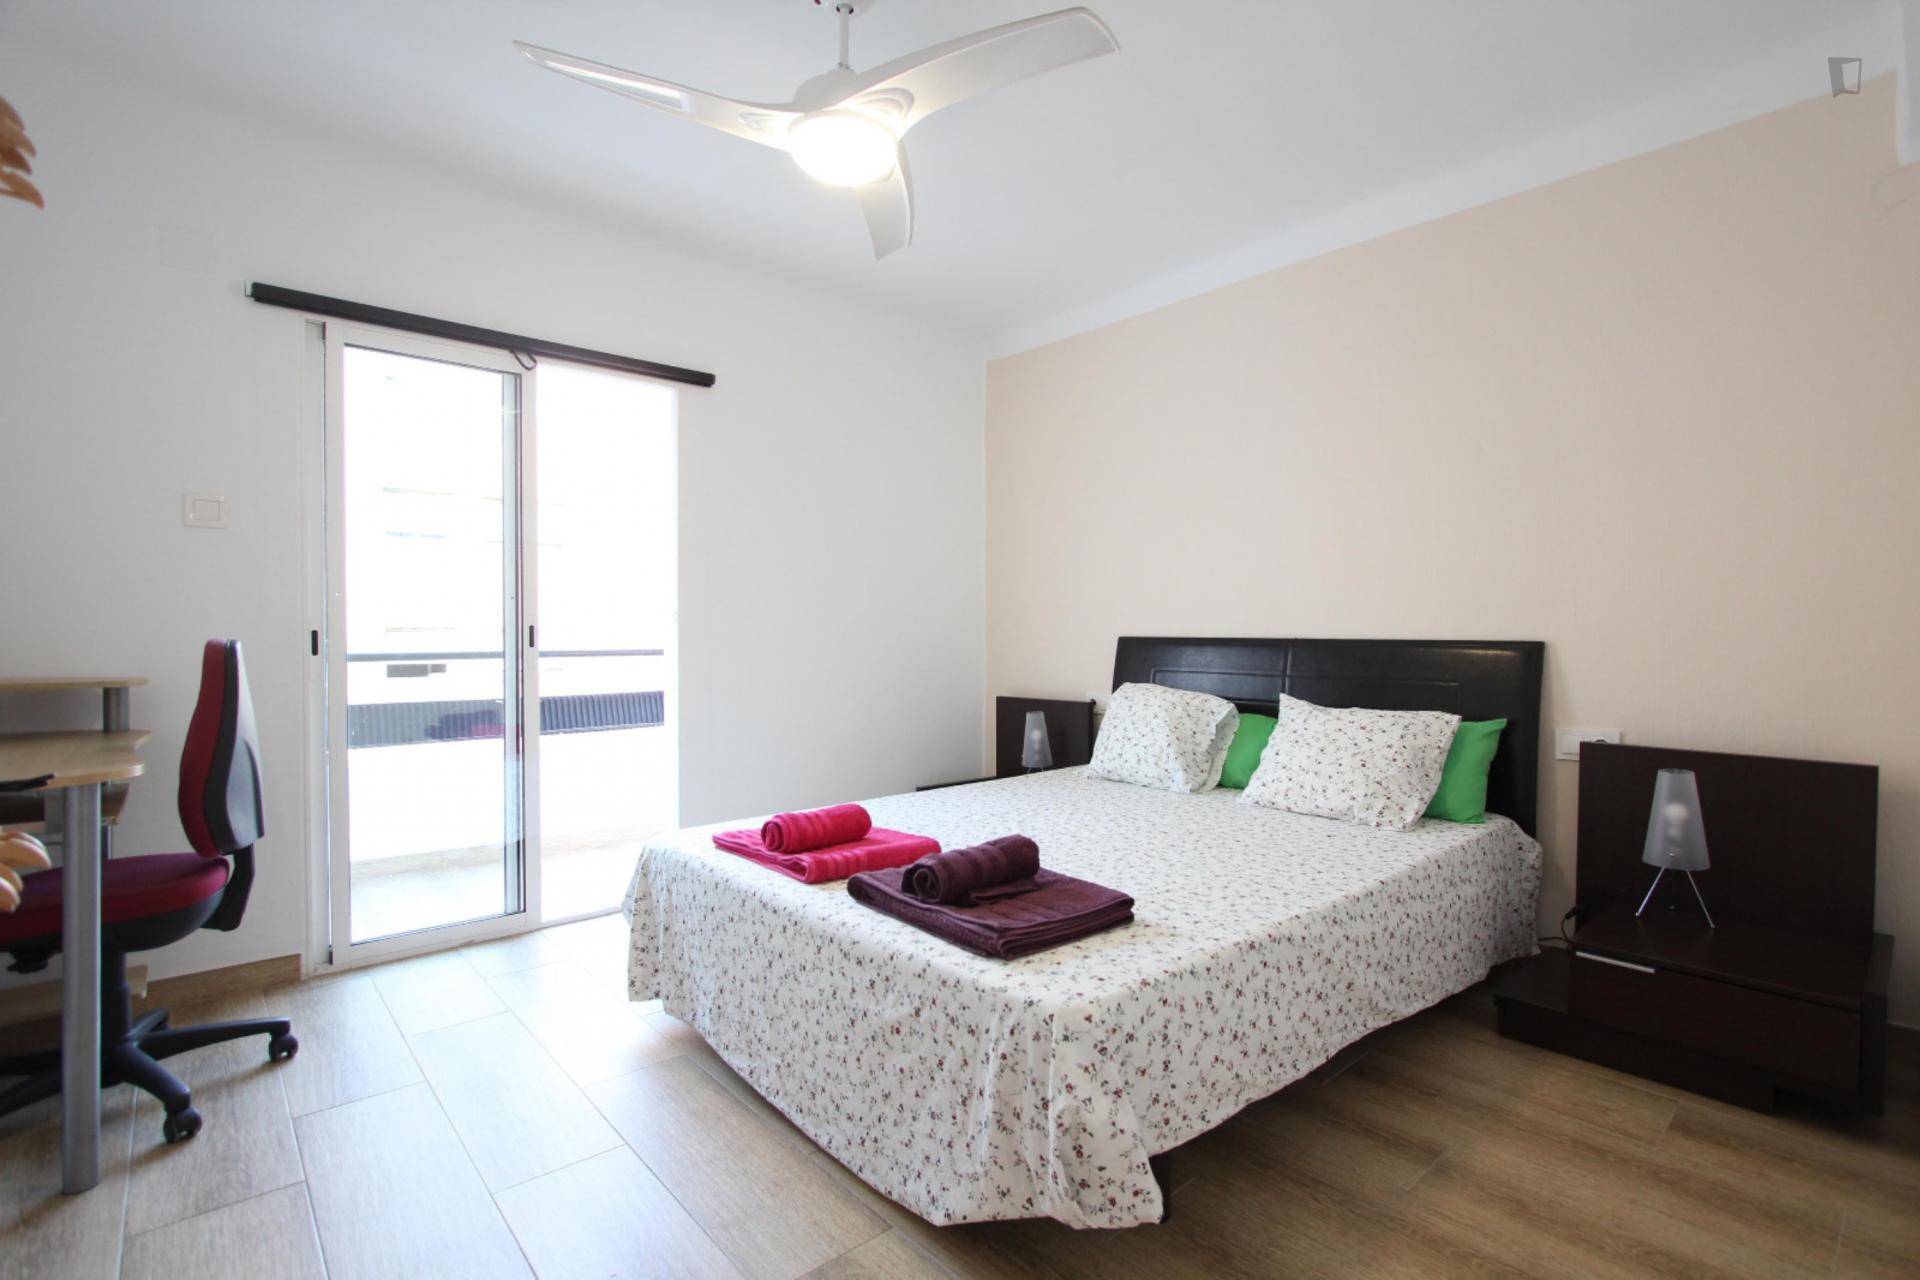 Ceres - Shared apartment in Alicante for expats